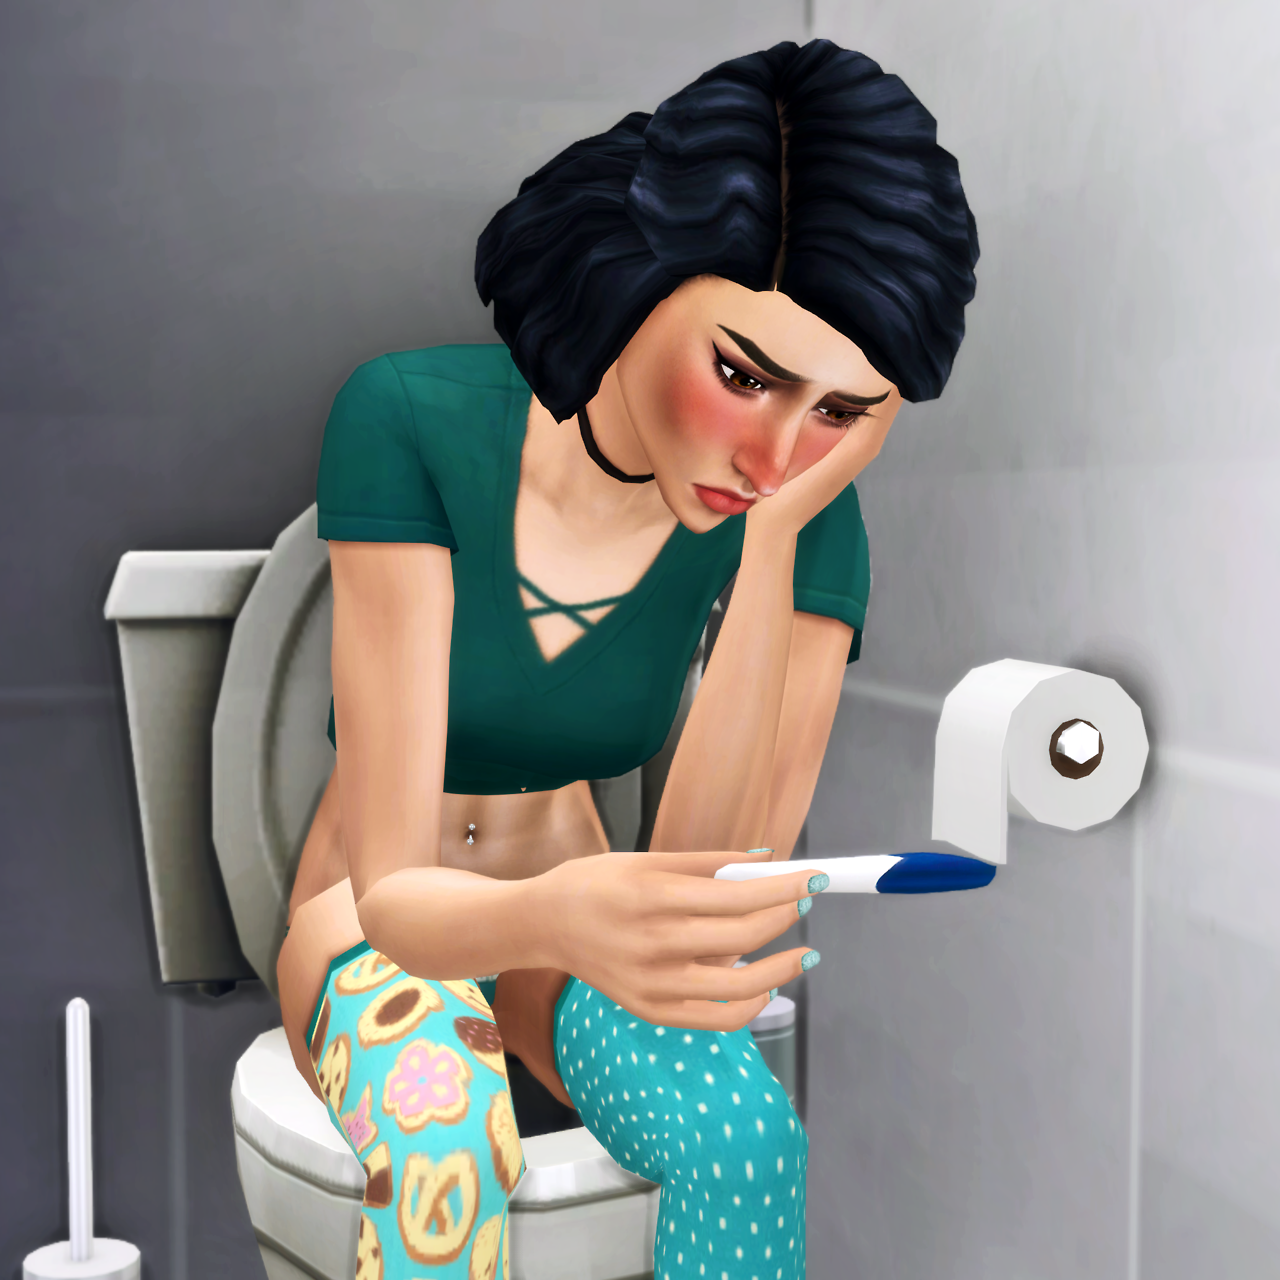 sims 4 teen pregnancy mod not working